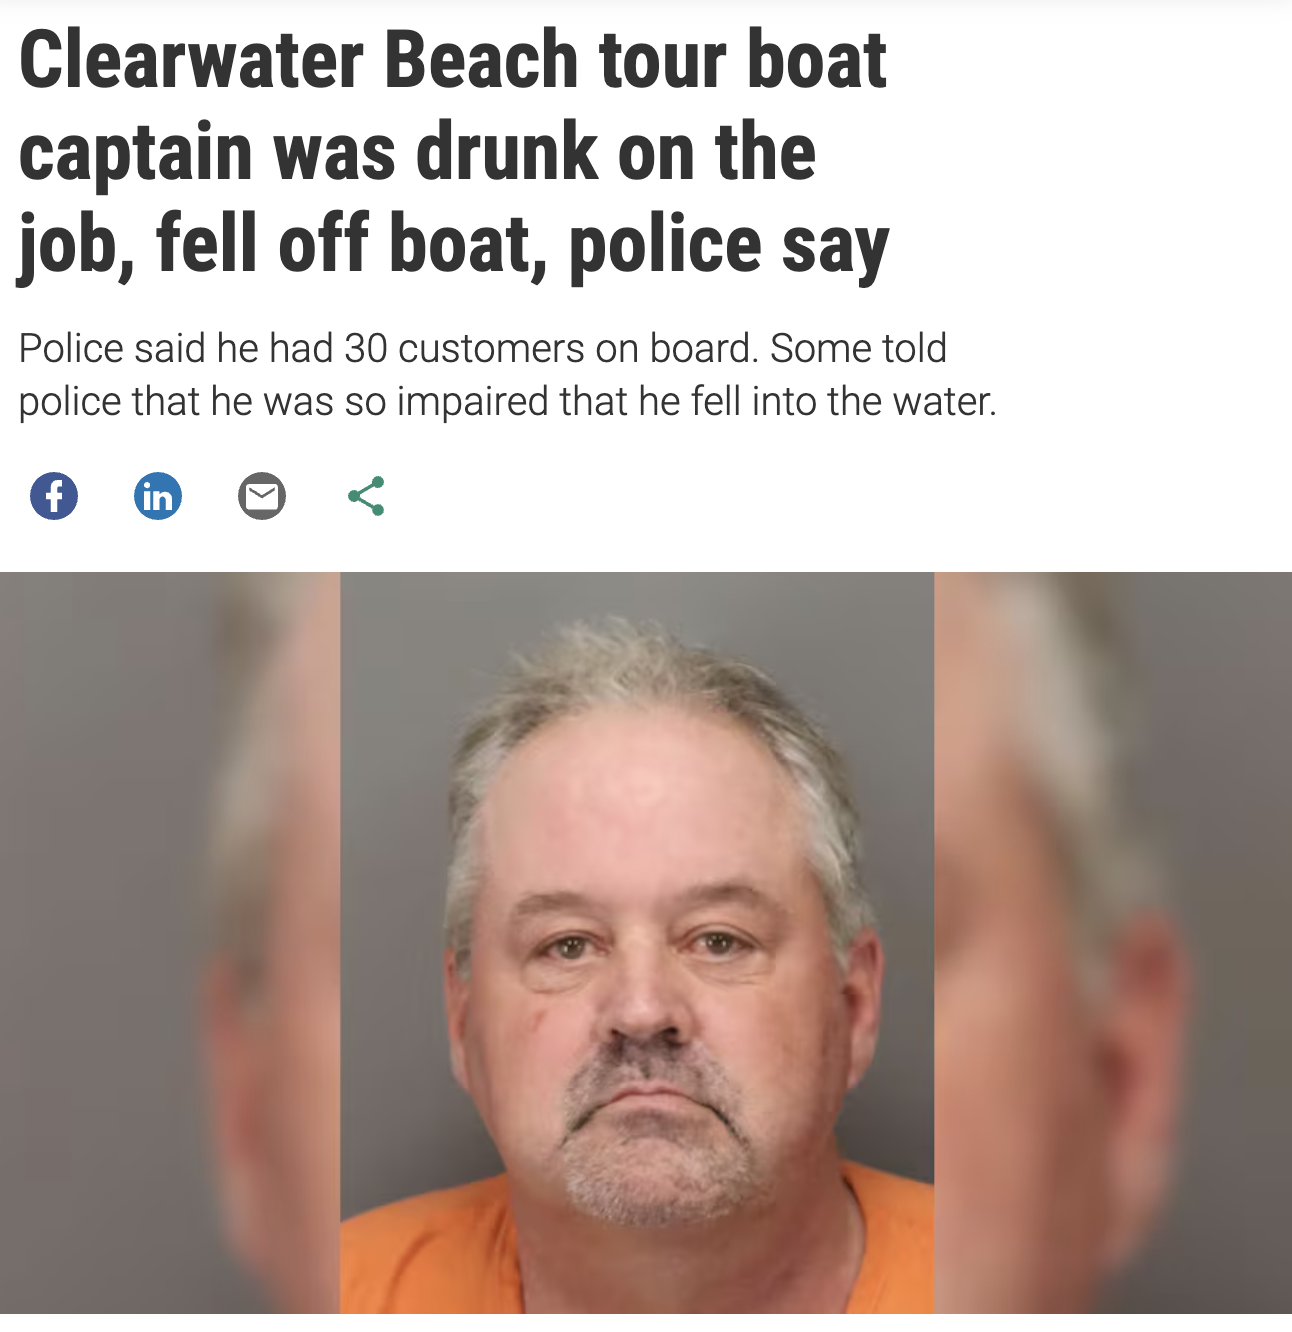 screenshot - Clearwater Beach tour boat captain was drunk on the job, fell off boat, police say Police said he had 30 customers on board. Some told police that he was so impaired that he fell into the water. f in